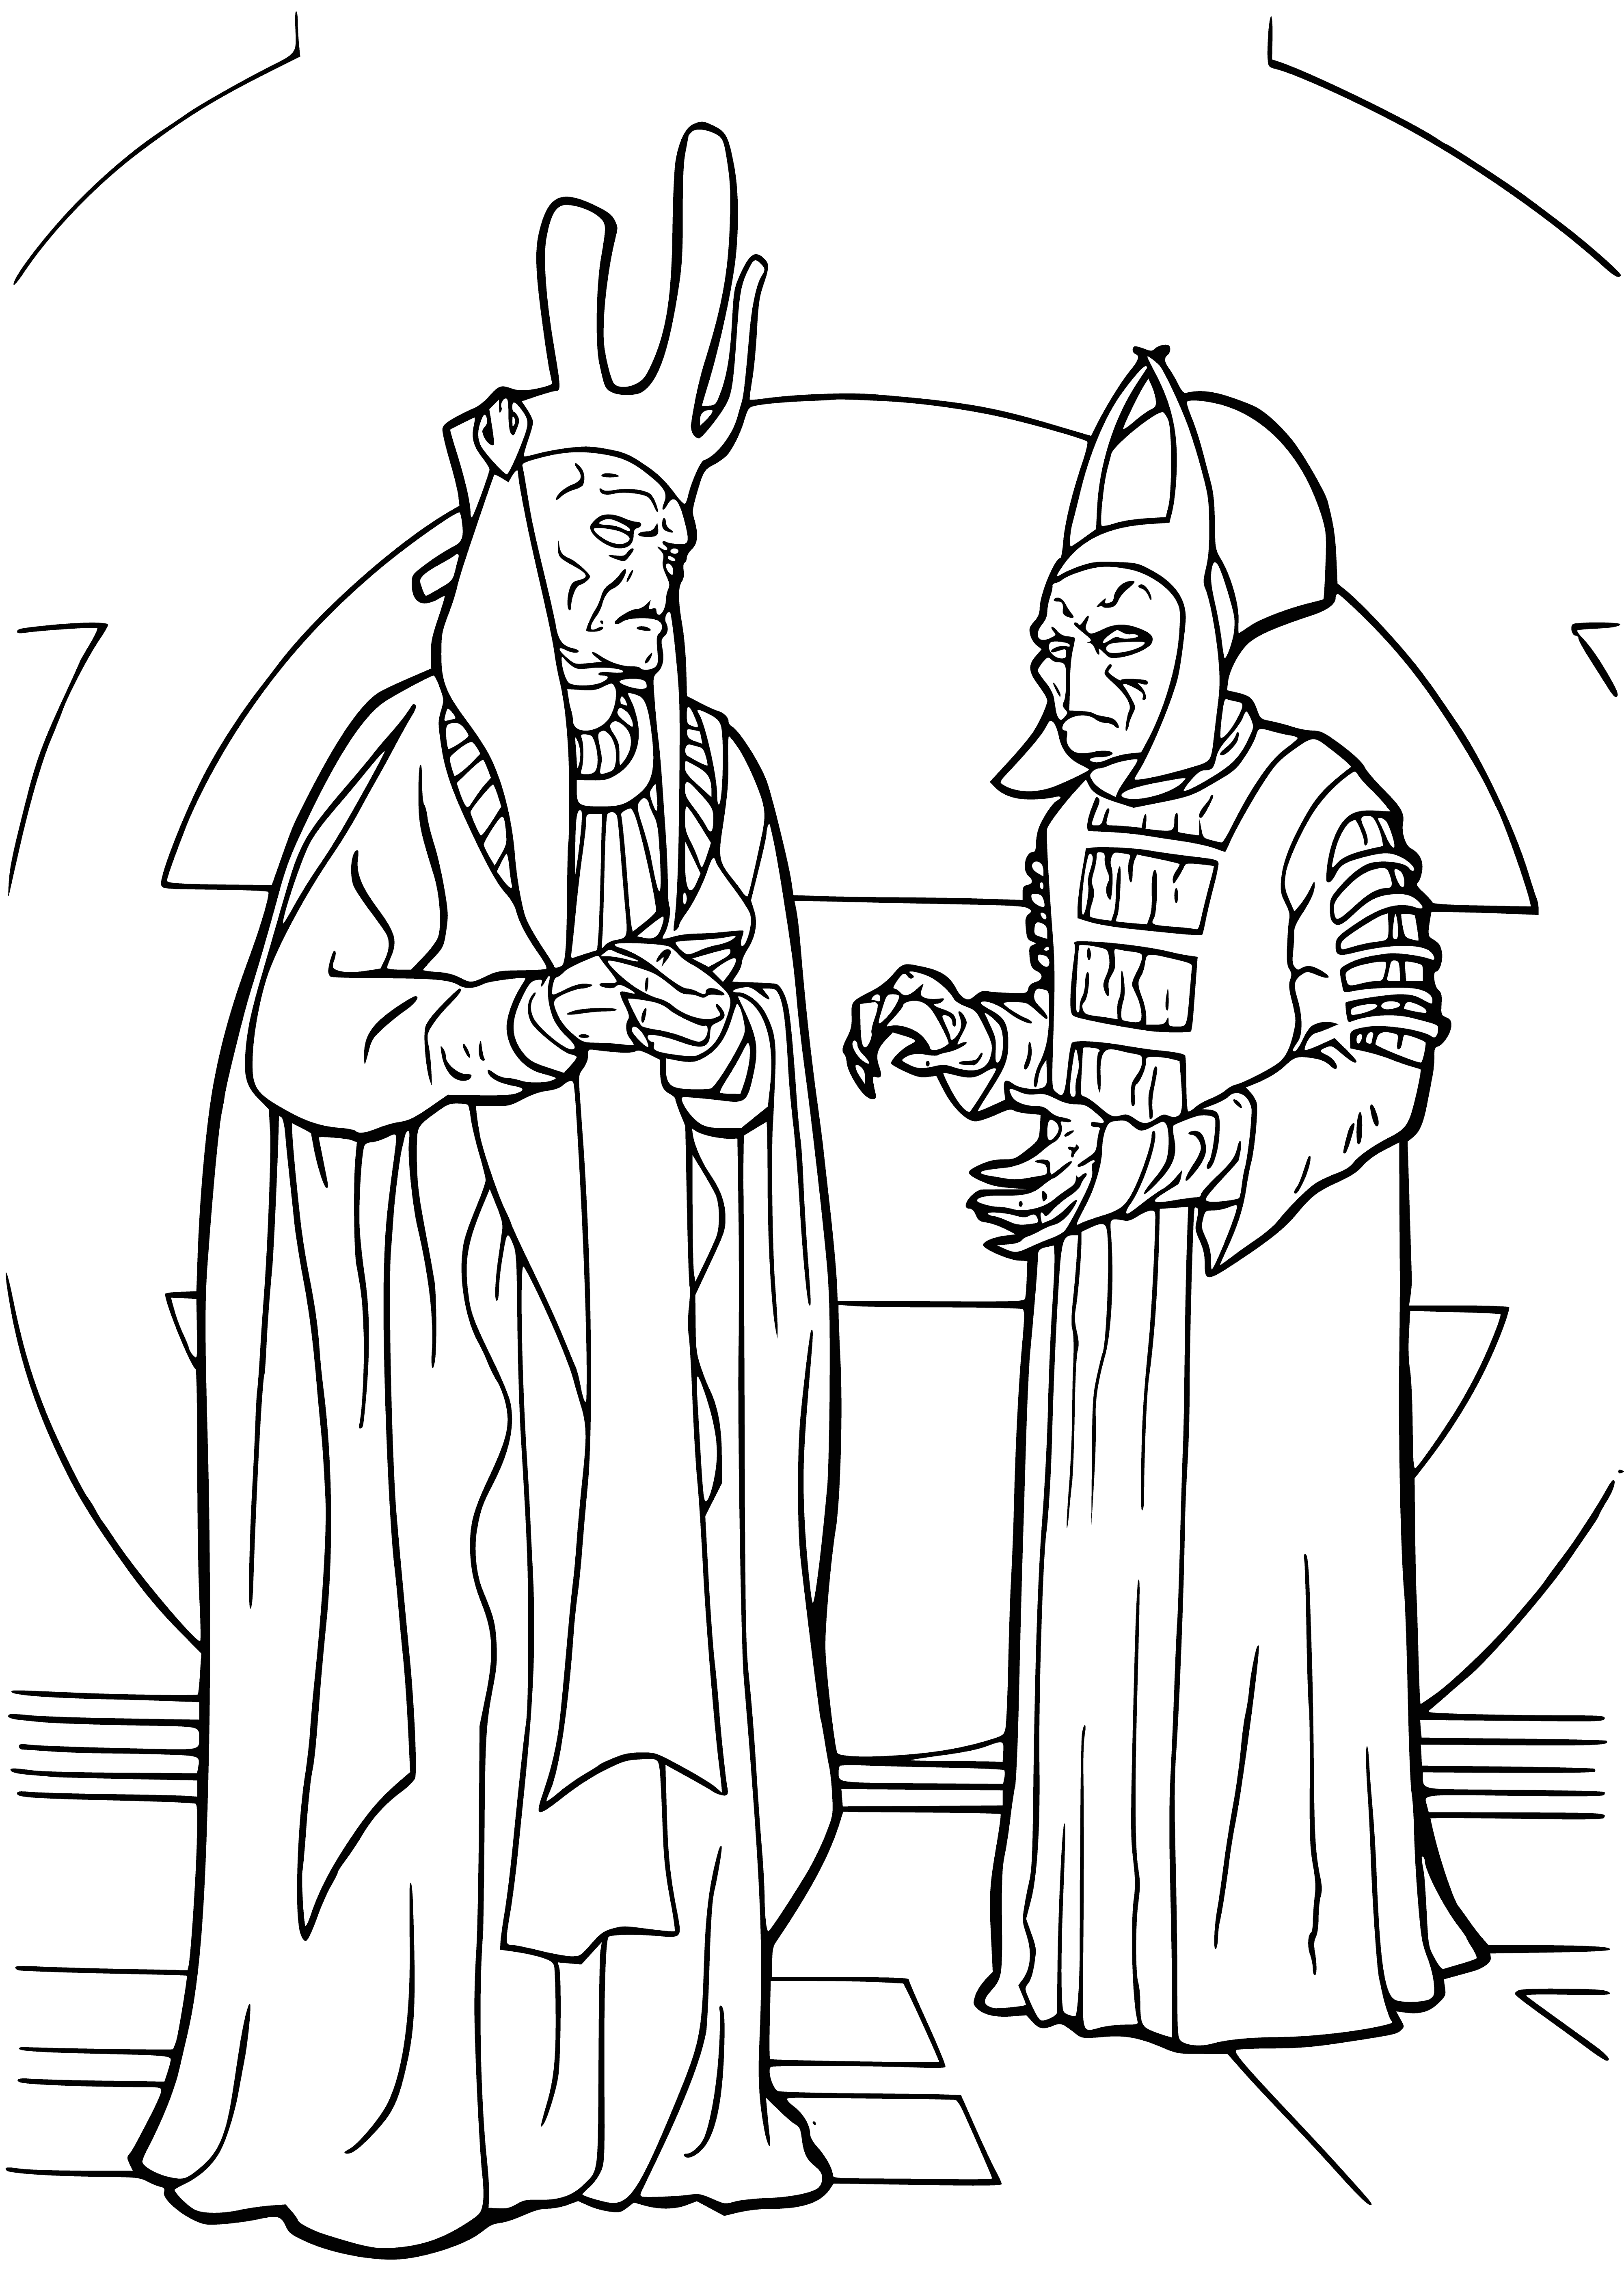 coloring page: Head of Trade Federation & assistant in room, wearing white/black robes & wielding blue/red lightsabers.